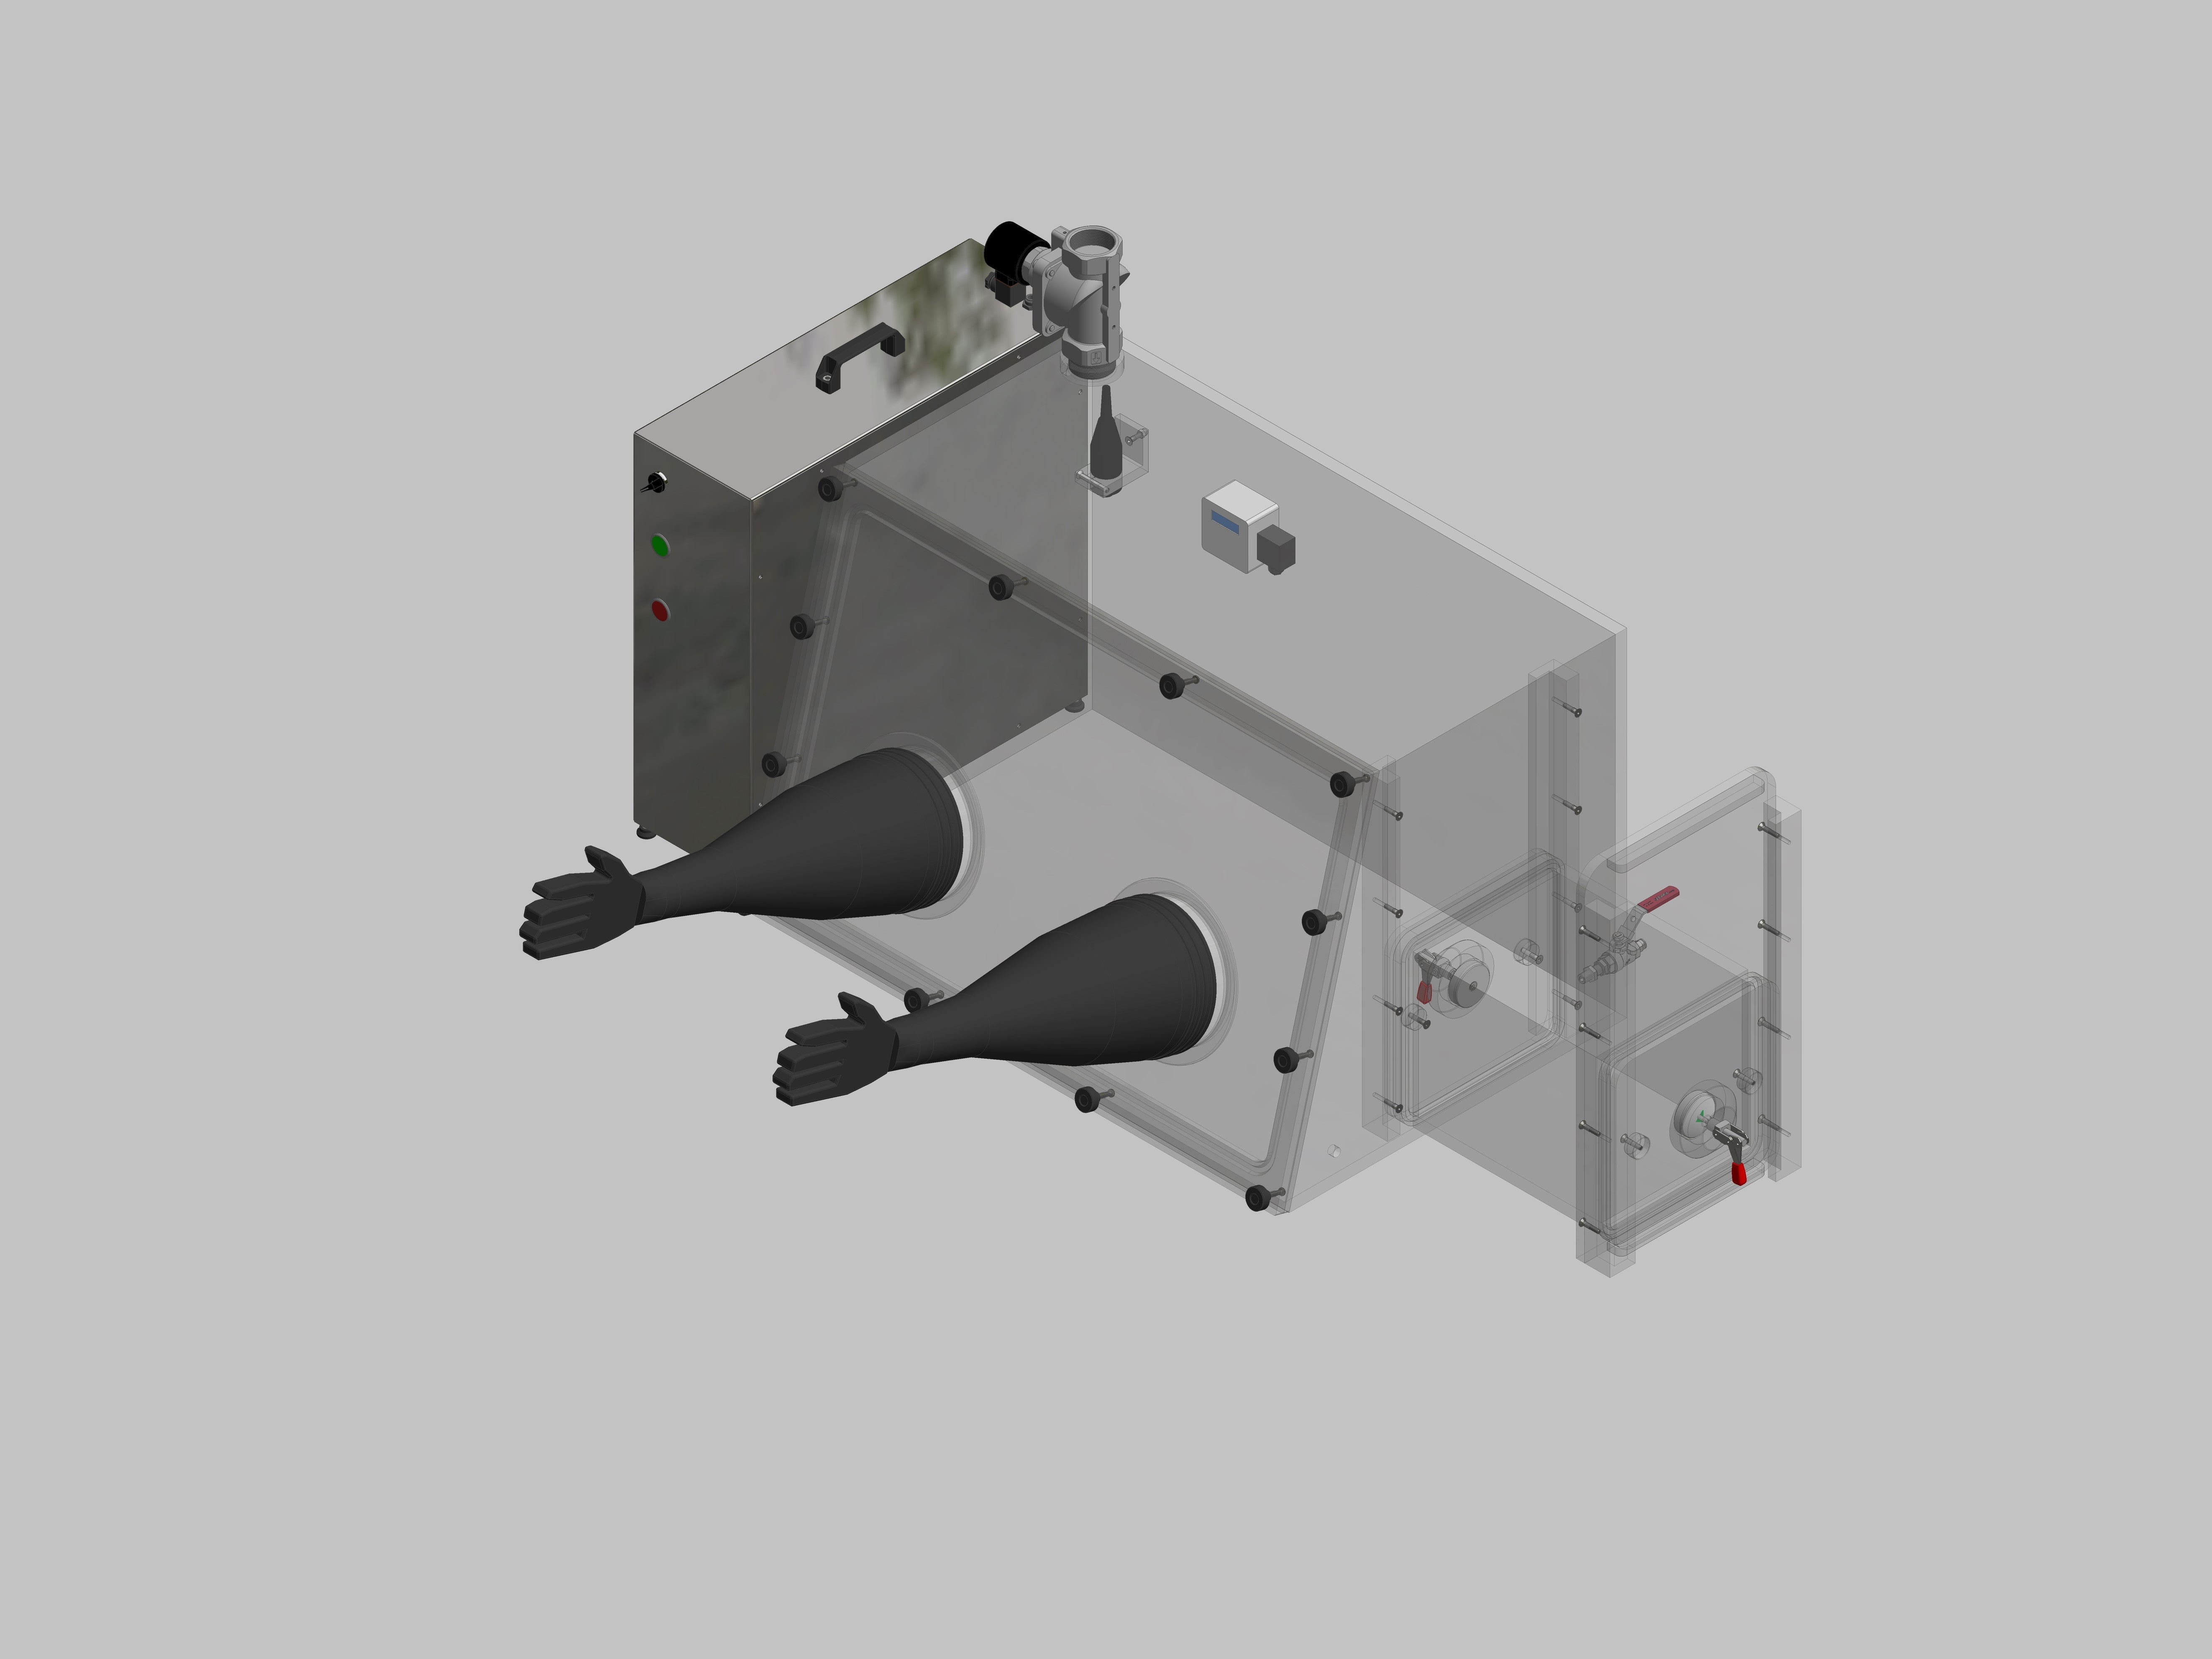 Glovebox made of acrylic&gt; Gas filling: automatic flushing with pressure control, front design: removable, side design: rectangular lock, control: oxygen regulator